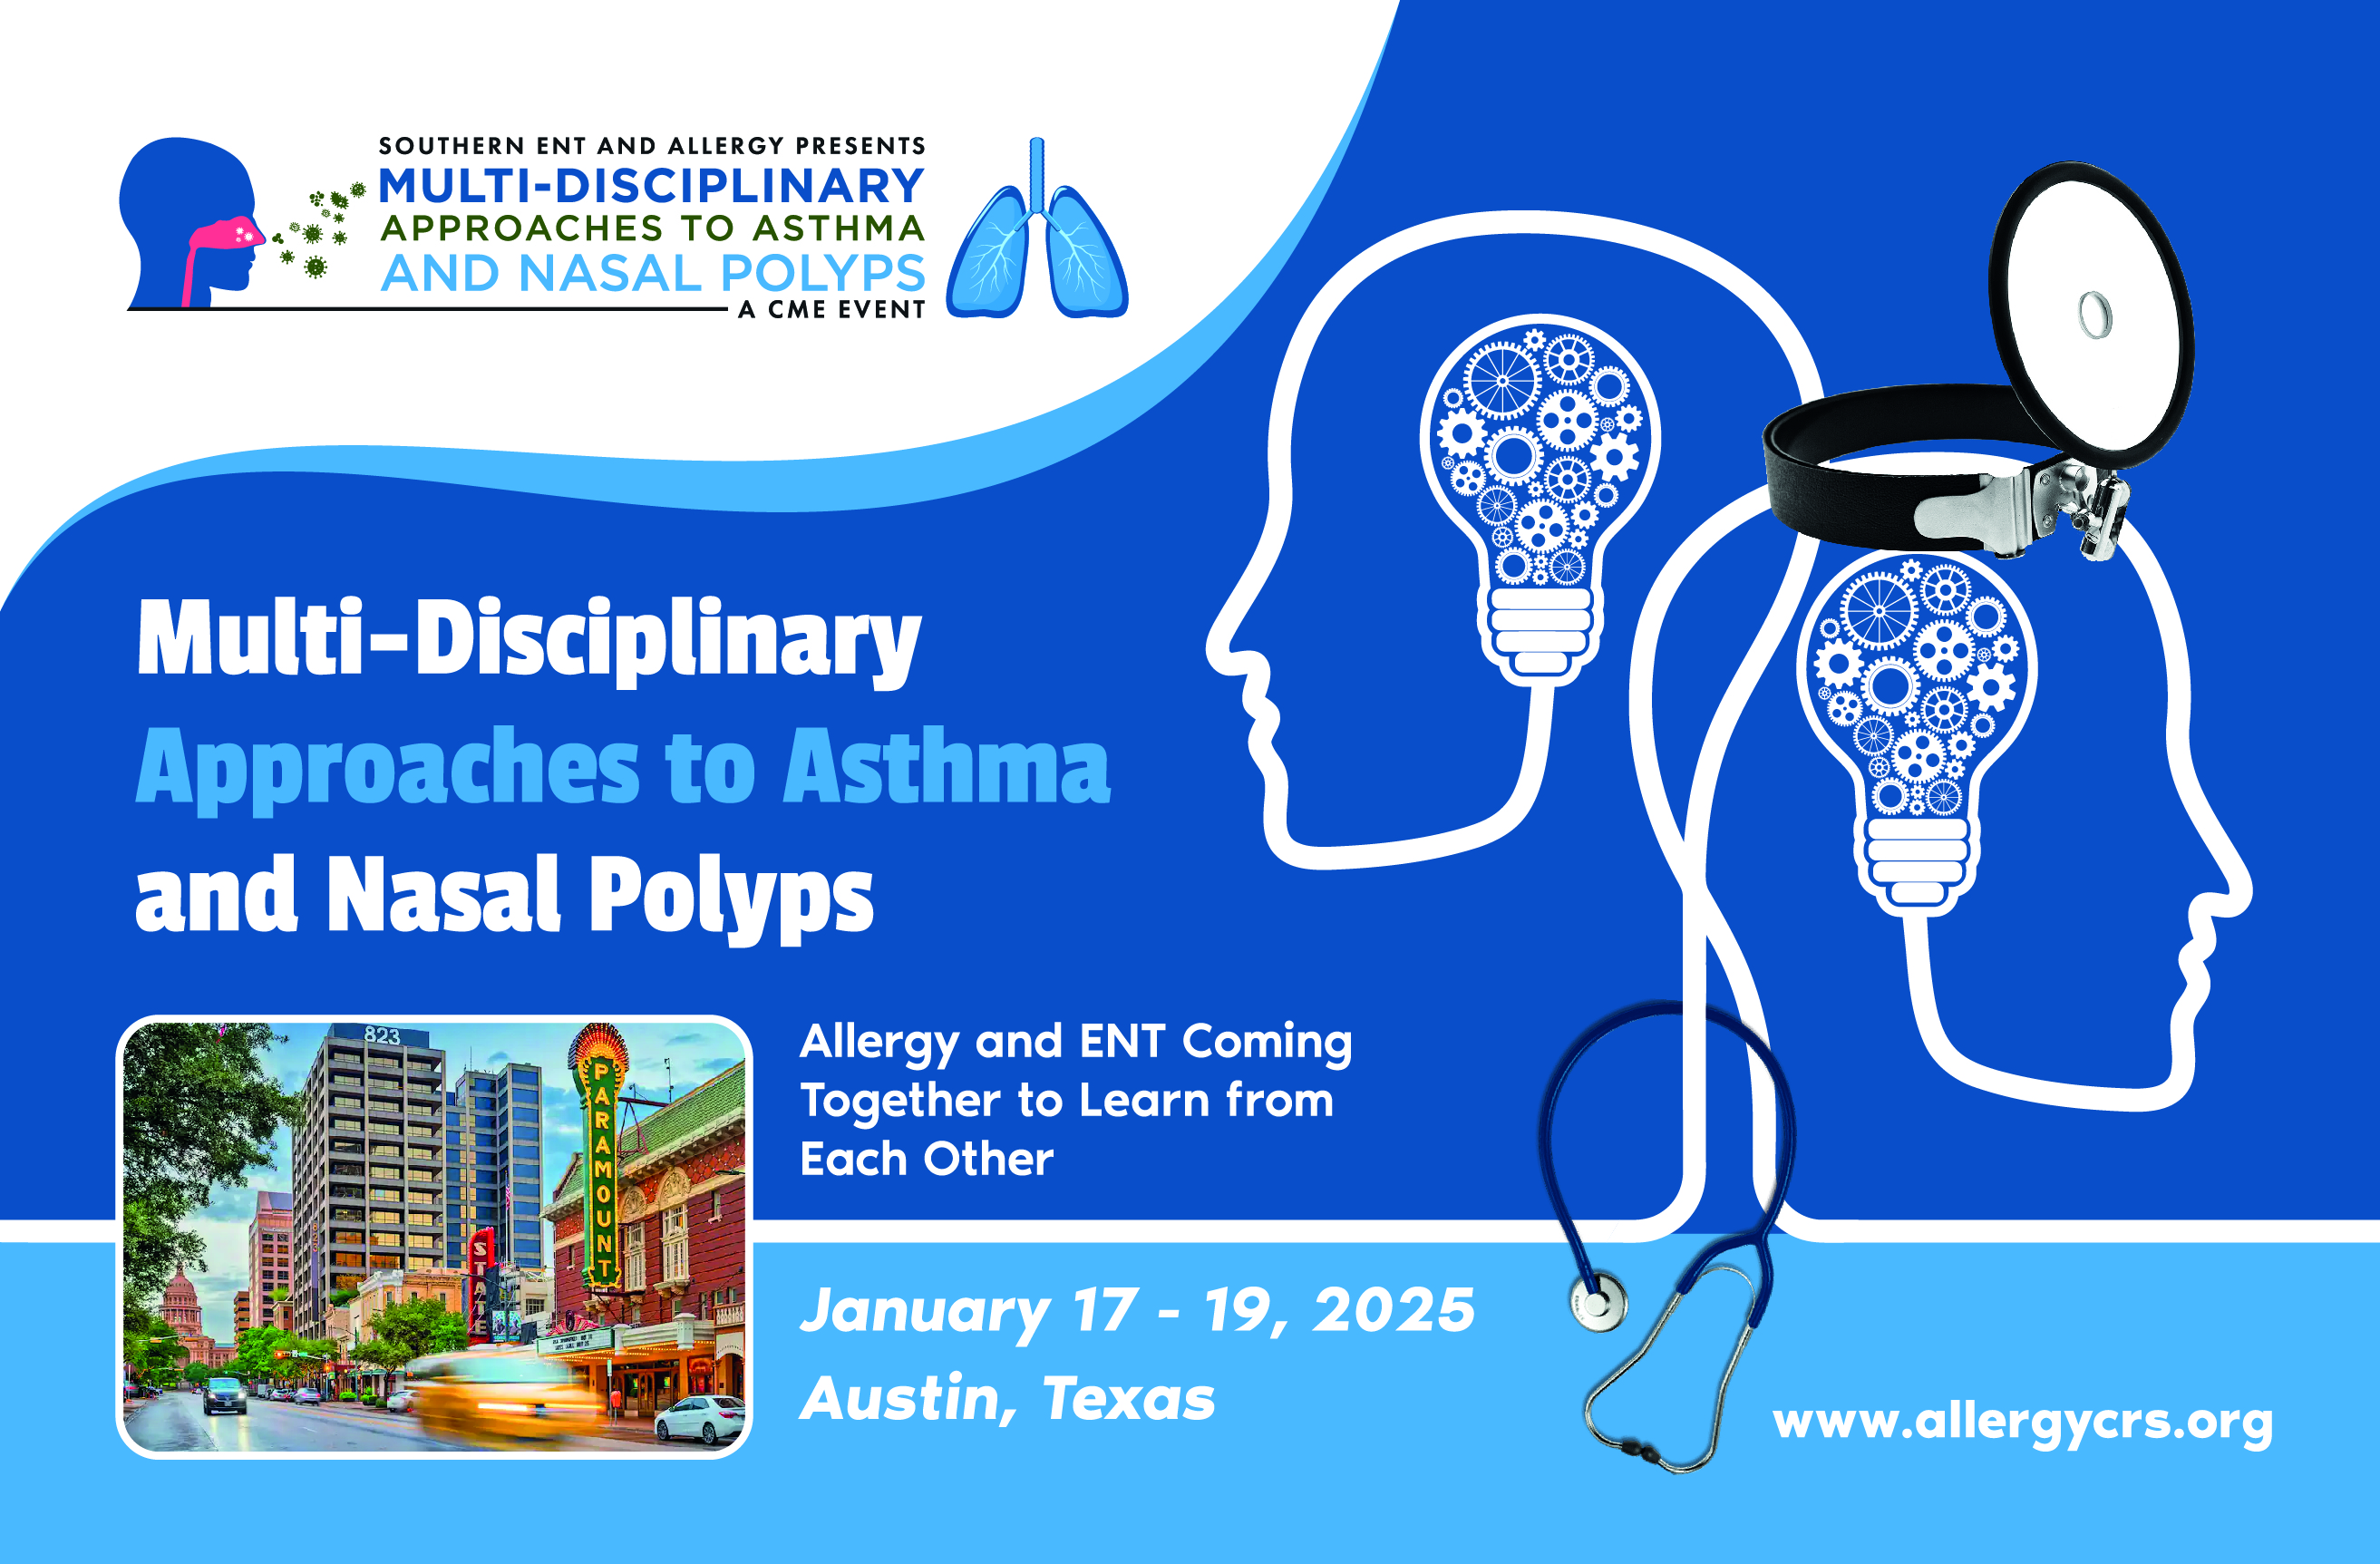 Multi-Disciplinary Approaches to Asthma and Nasal Polyps